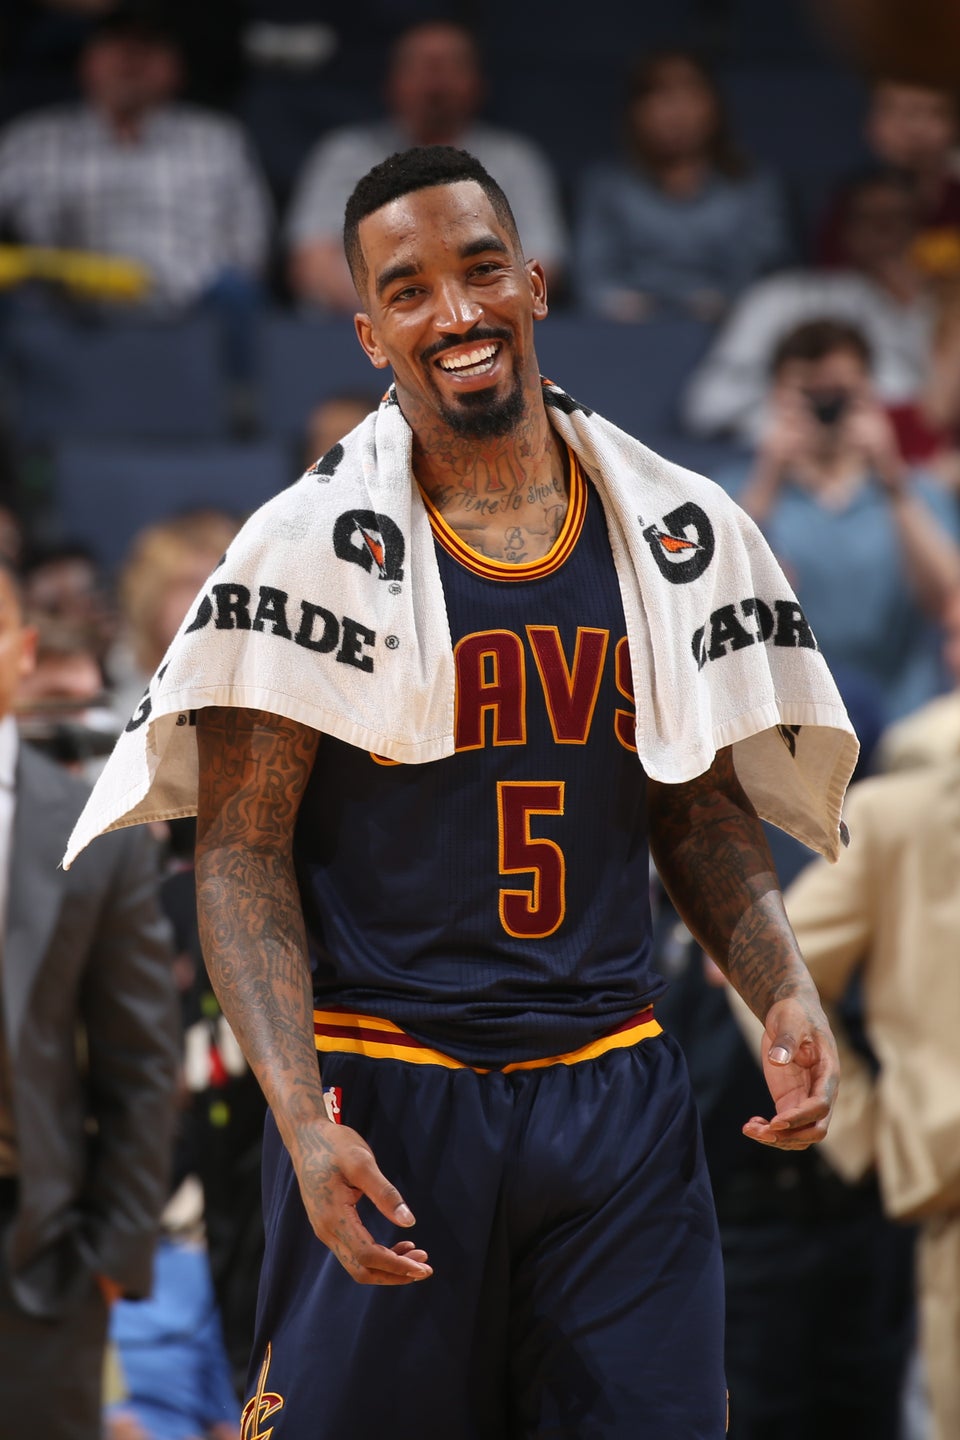 NBA Star J.R. Smith’s Daughter Born 5 Months Early Now Weighs 6 Lbs.: ‘Our Baby Has Made It’